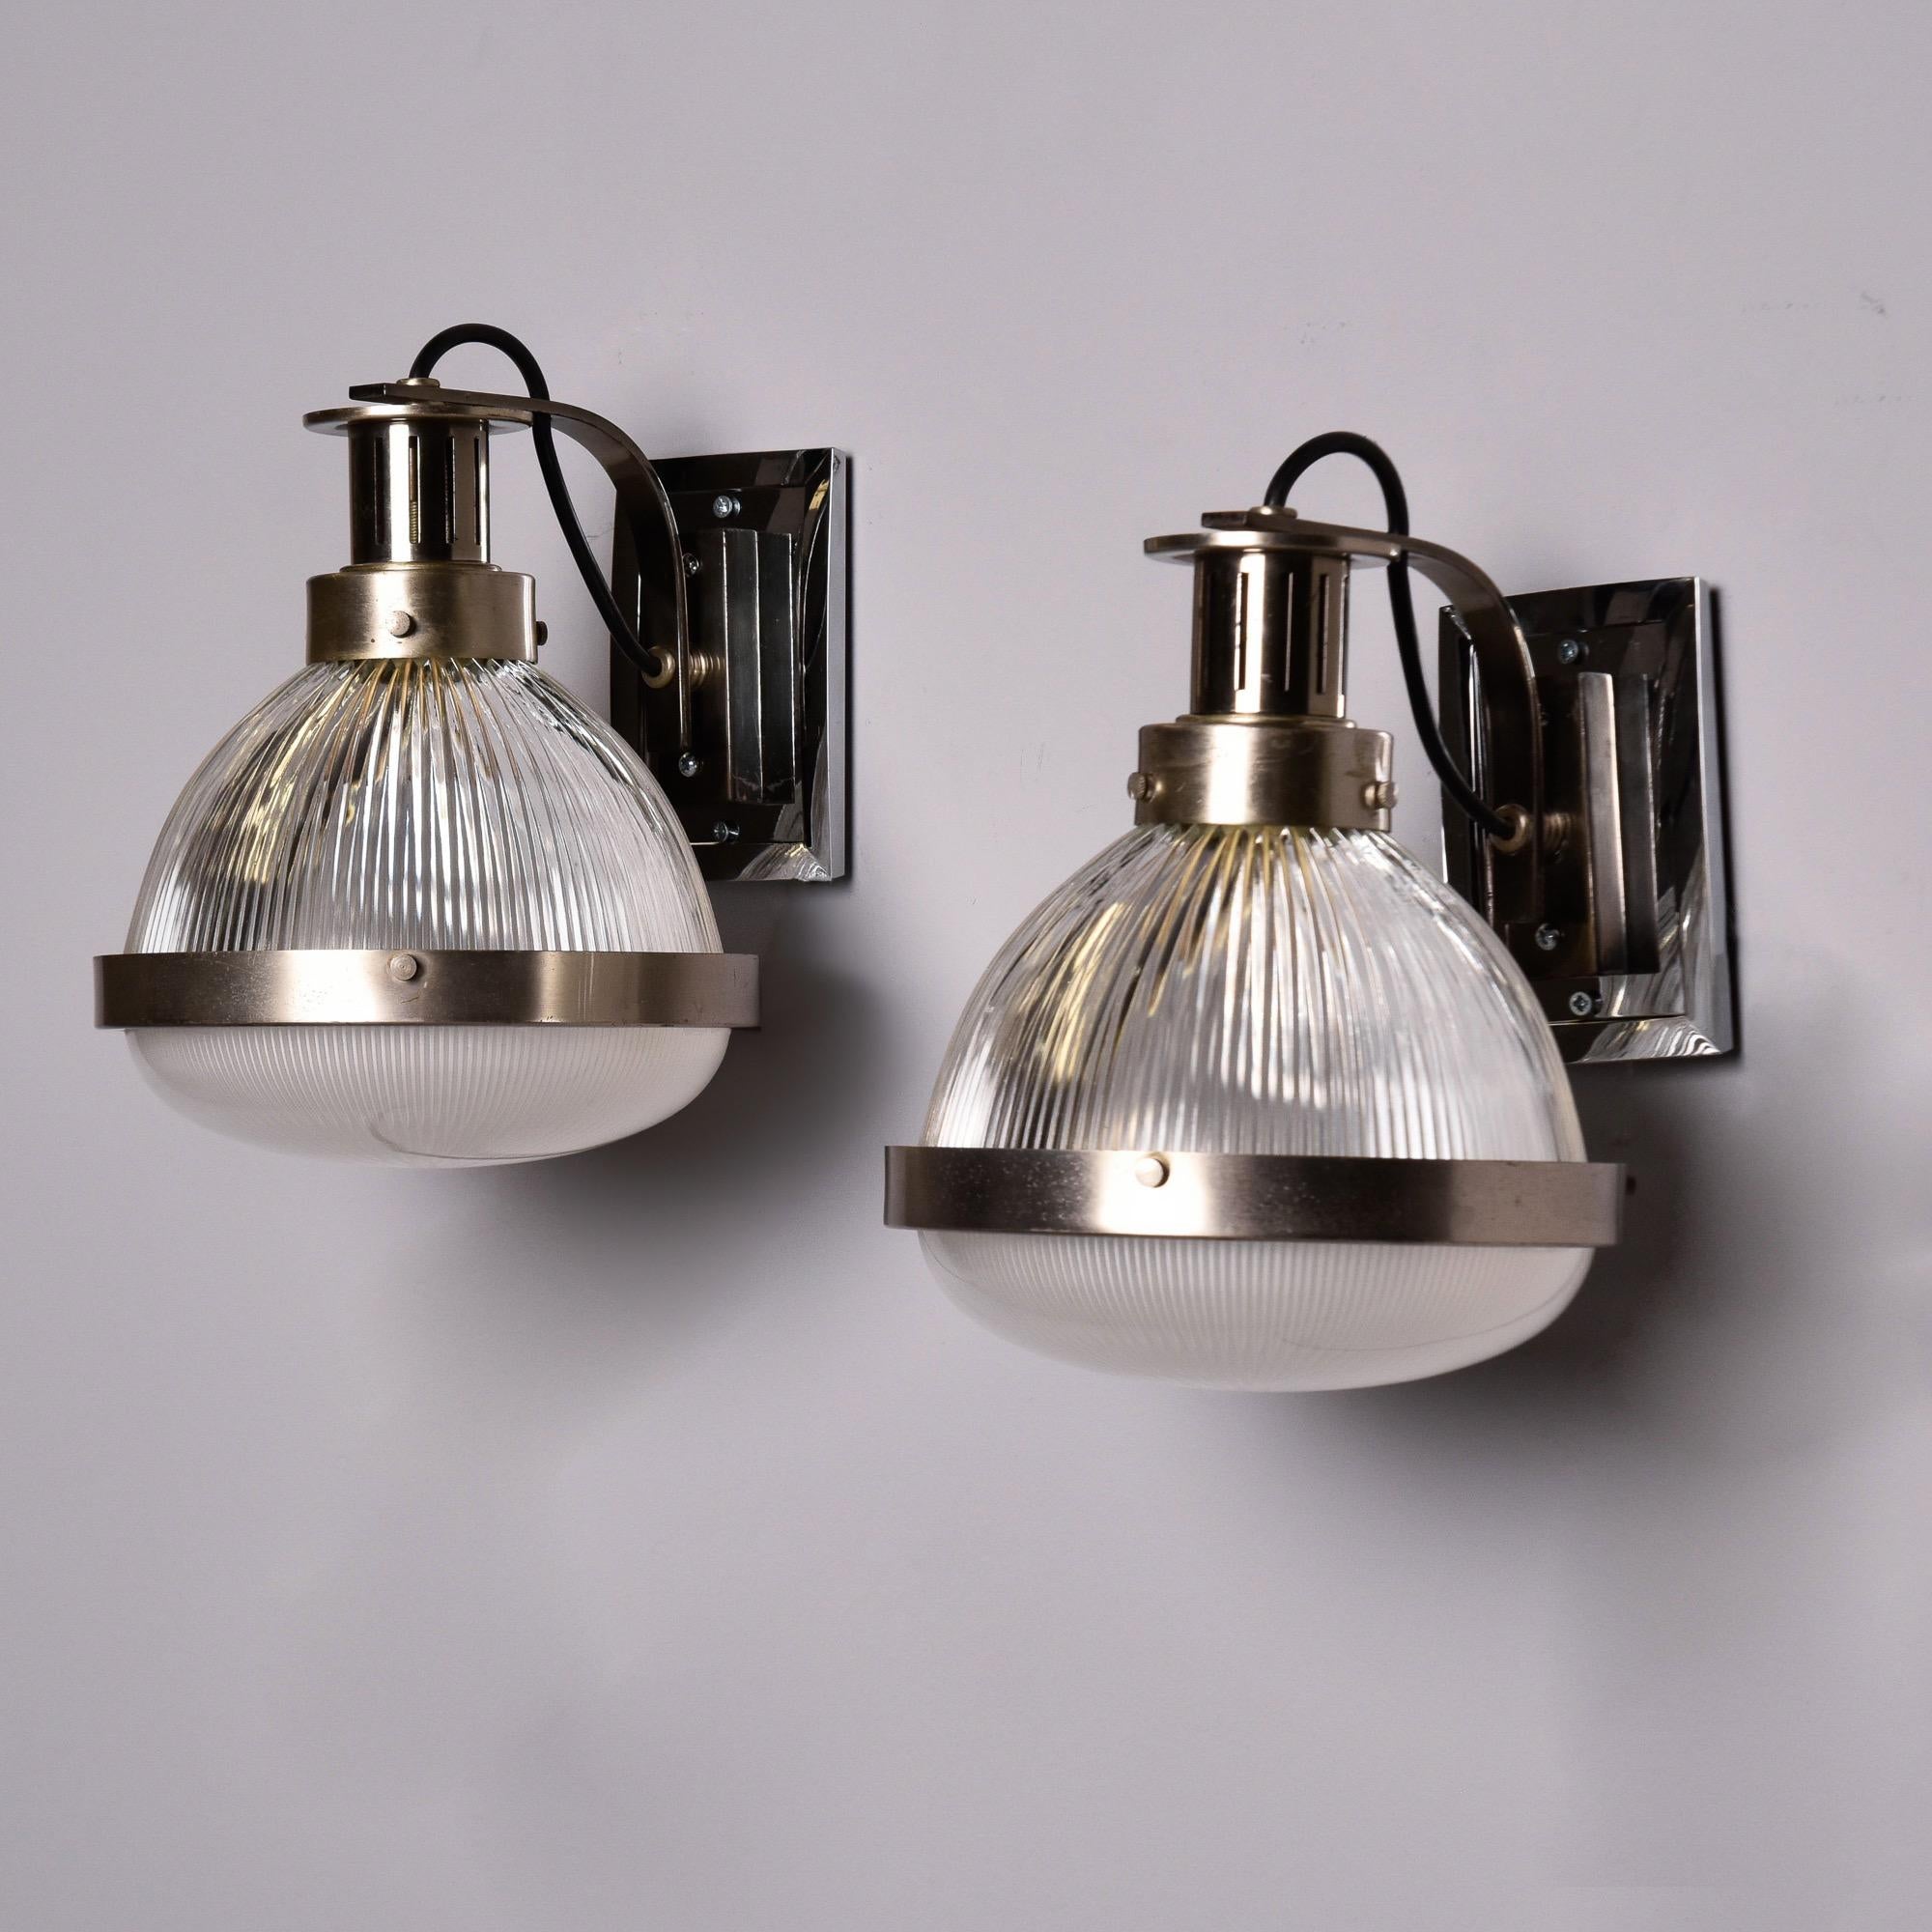 Found in England, this pair of wall lights or sconces date from the 1970s and feature chrome back plates and fittings with globes in clear, ribbed glass toward the top and more opaque glass covers. Each sconce has a single internal standard size